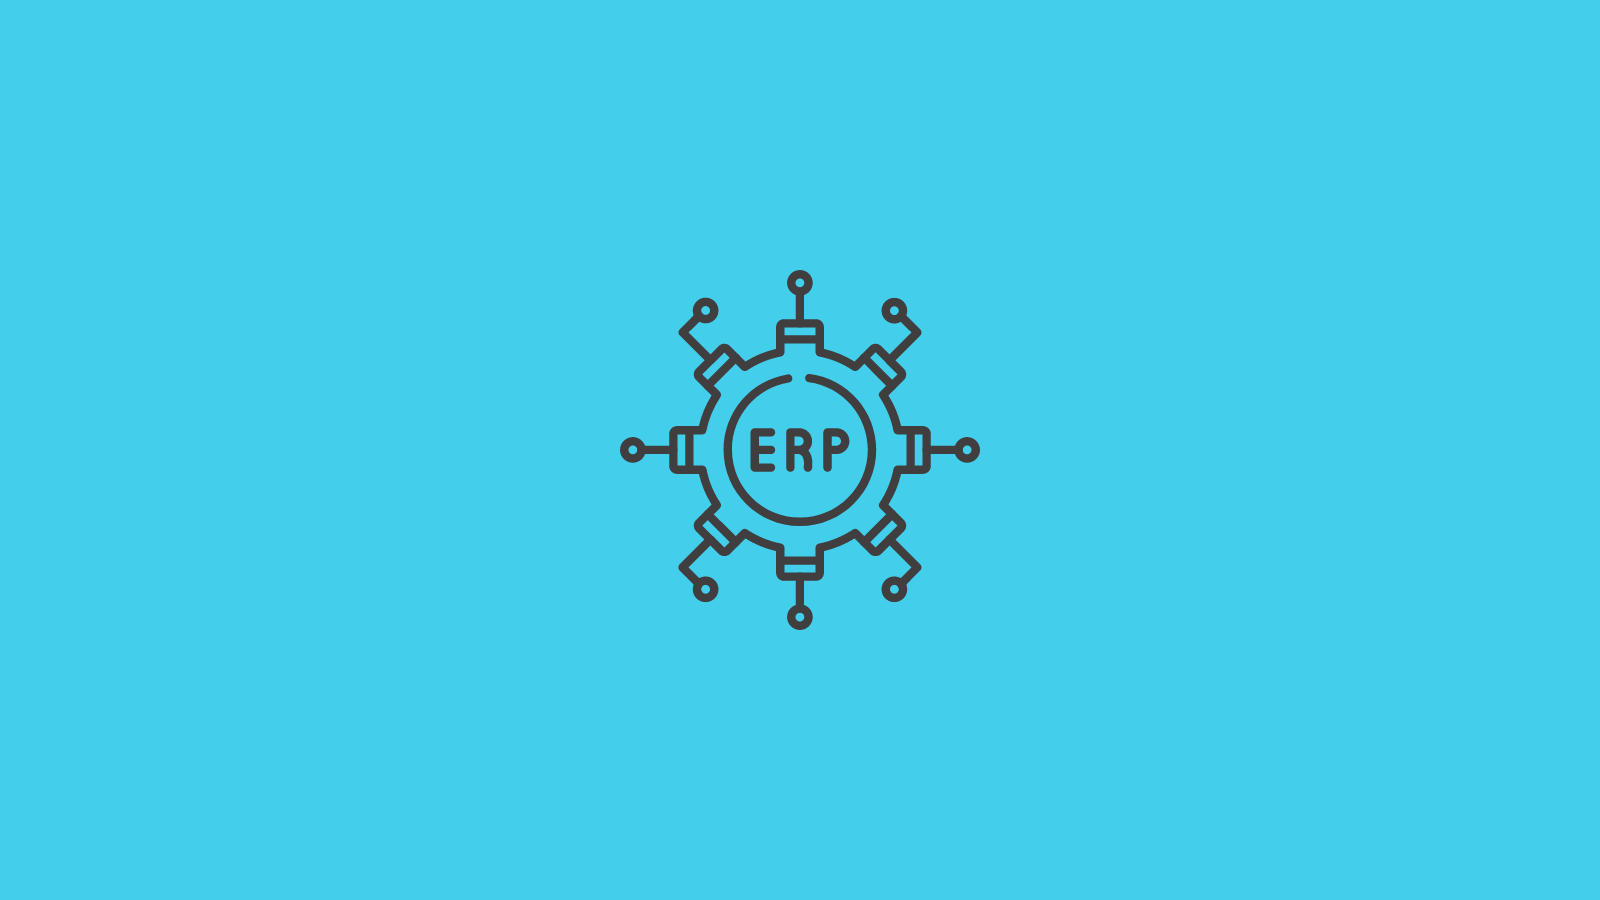 An ERP is Cost Efficient